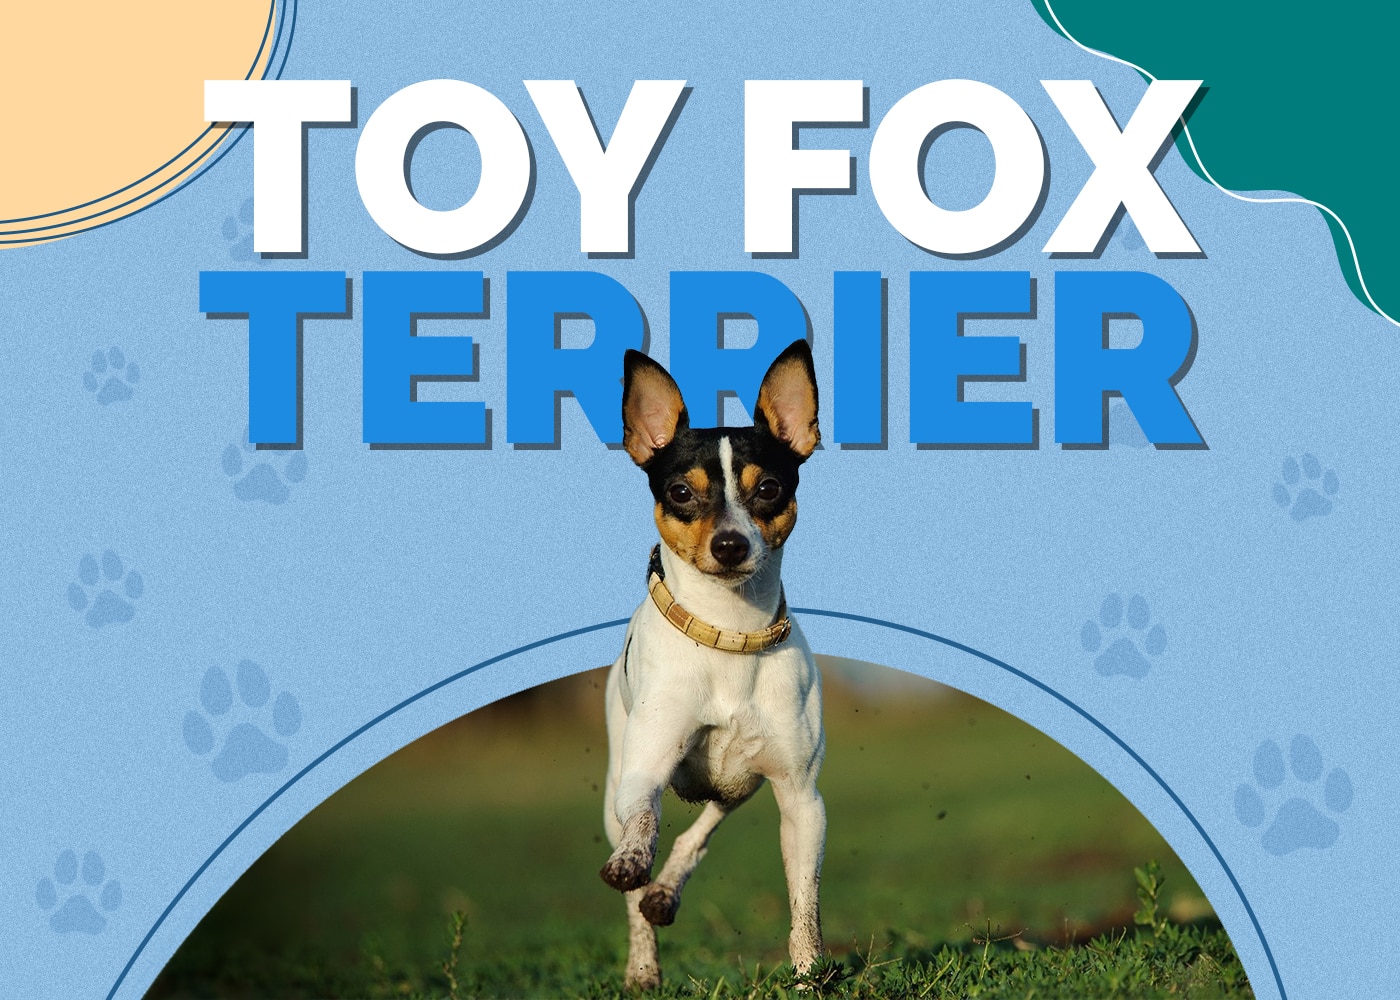 Toy Fox Terrier (Chihuahua & Greyhound Mix)